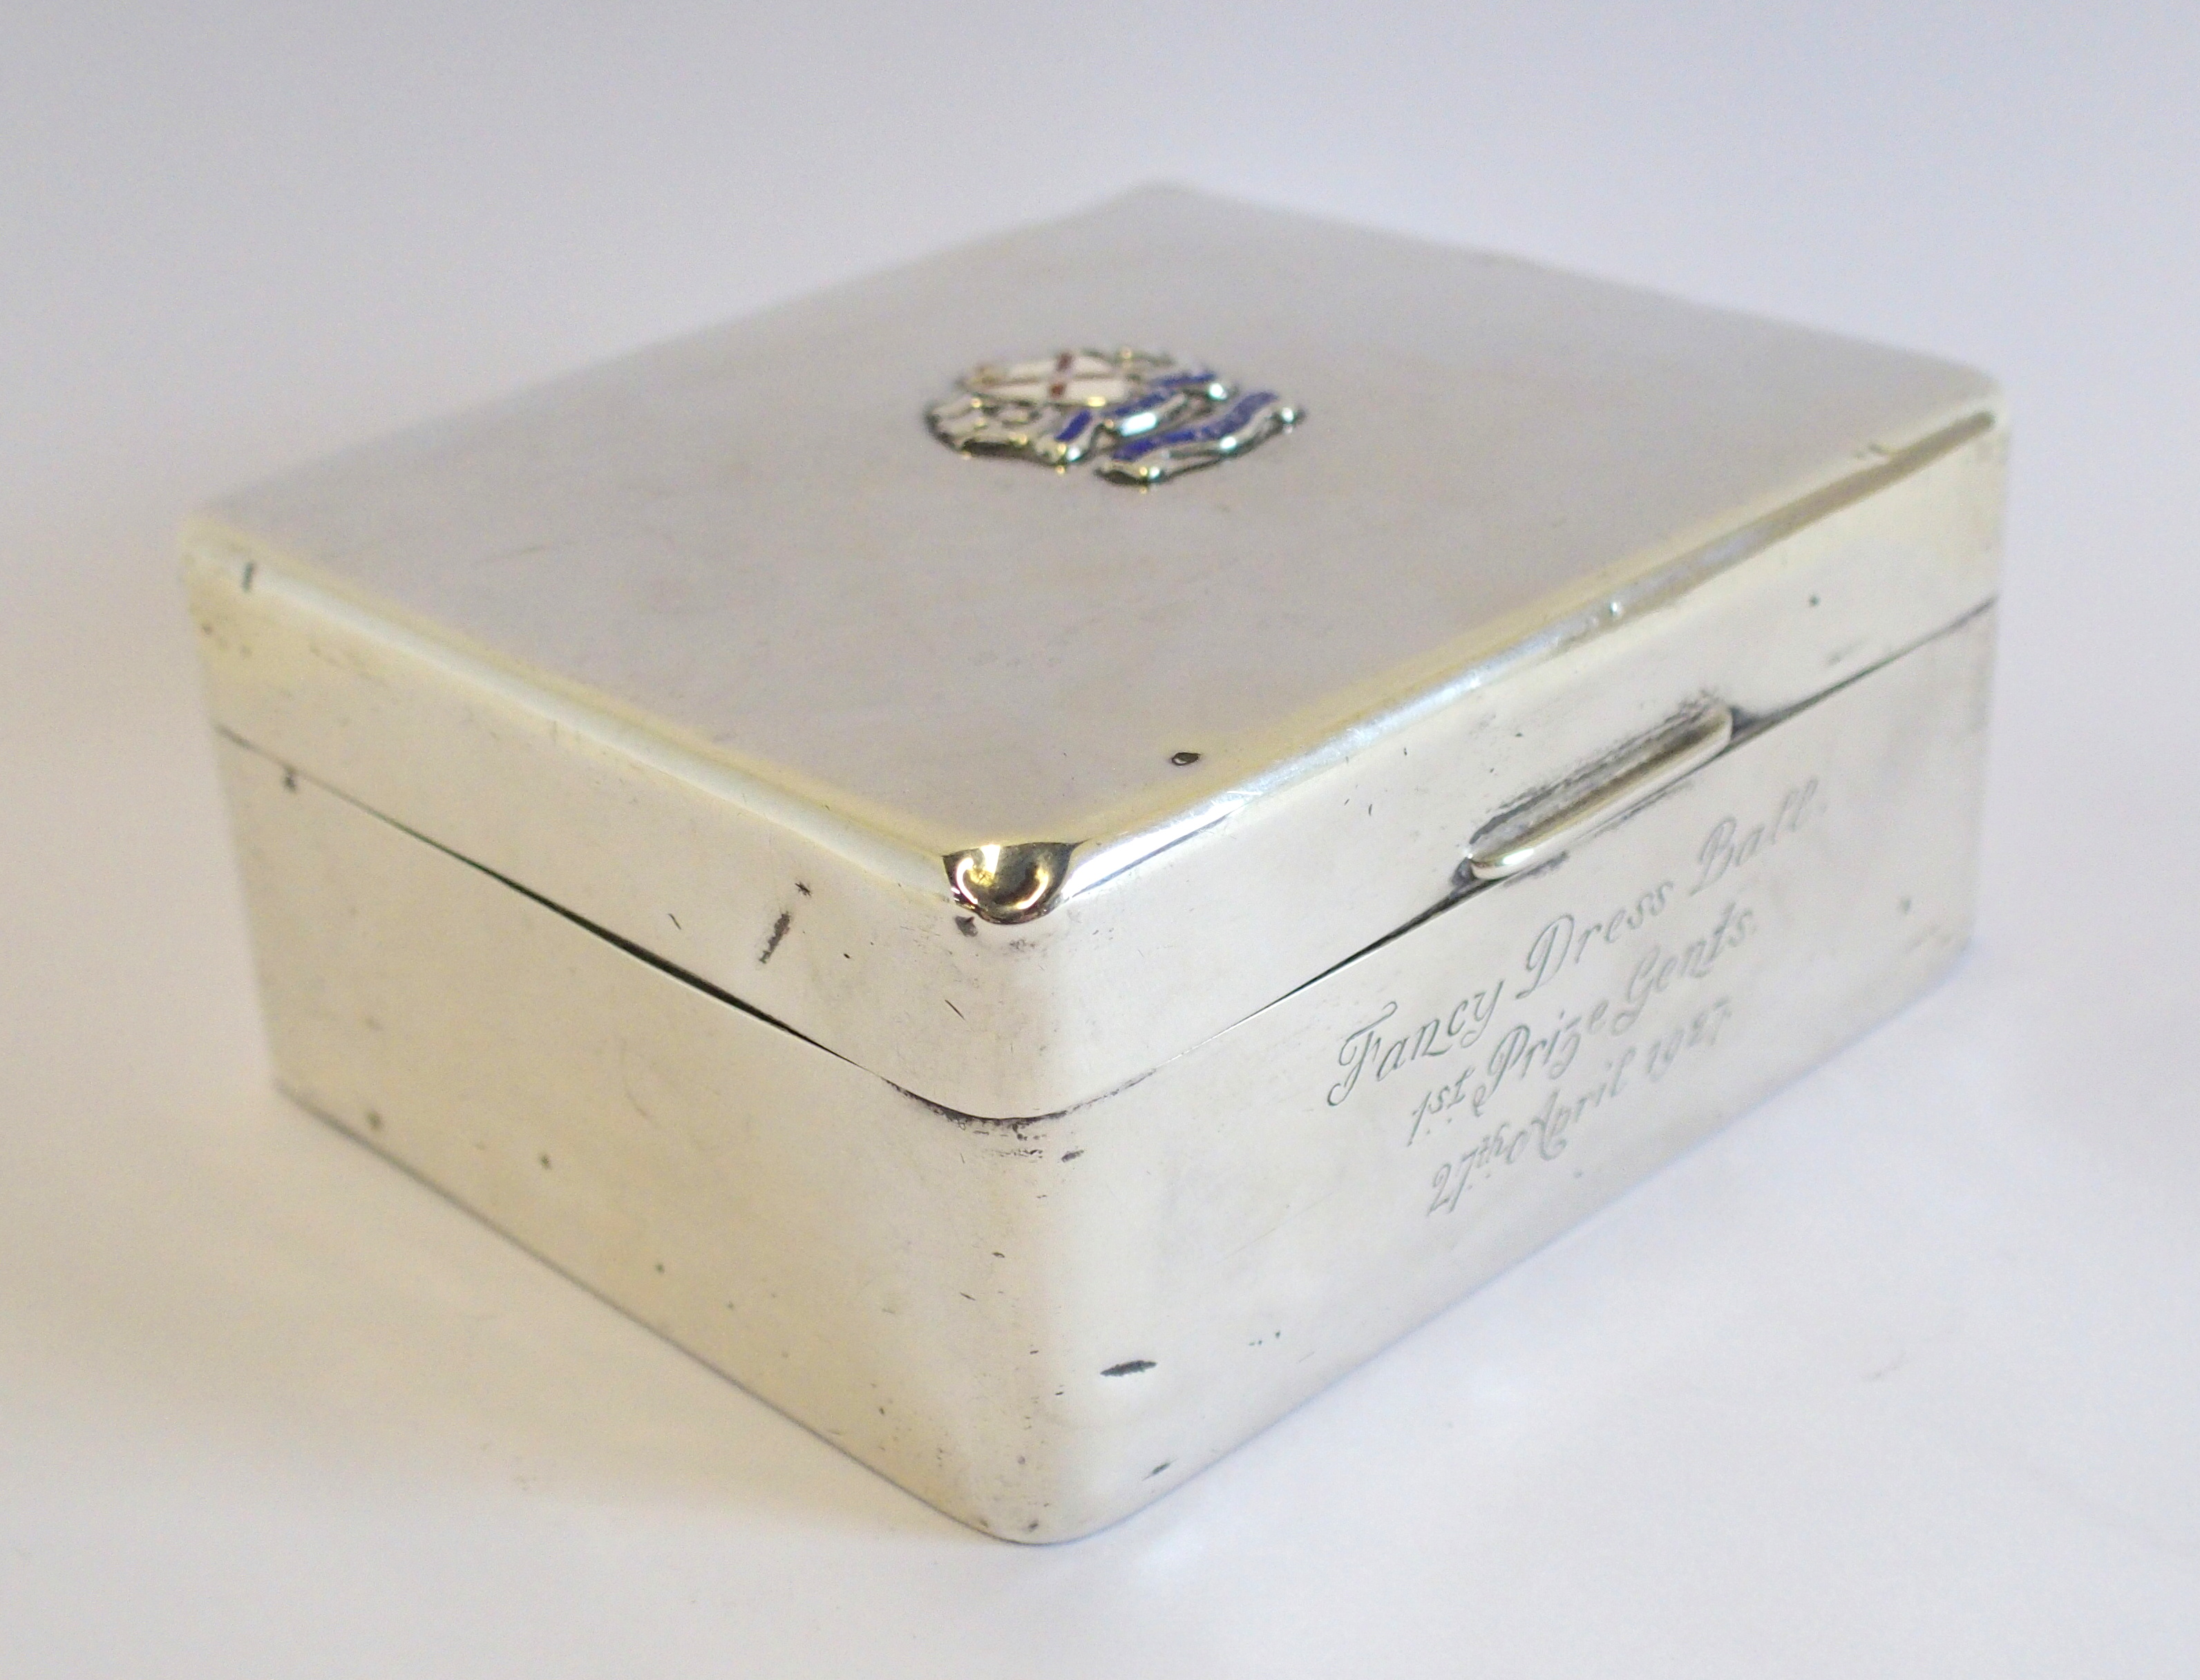 To be sold for BBC Children in Need
An Art Deco 'SS Arcadian' silver cigarette box by Mappin & - Image 6 of 10